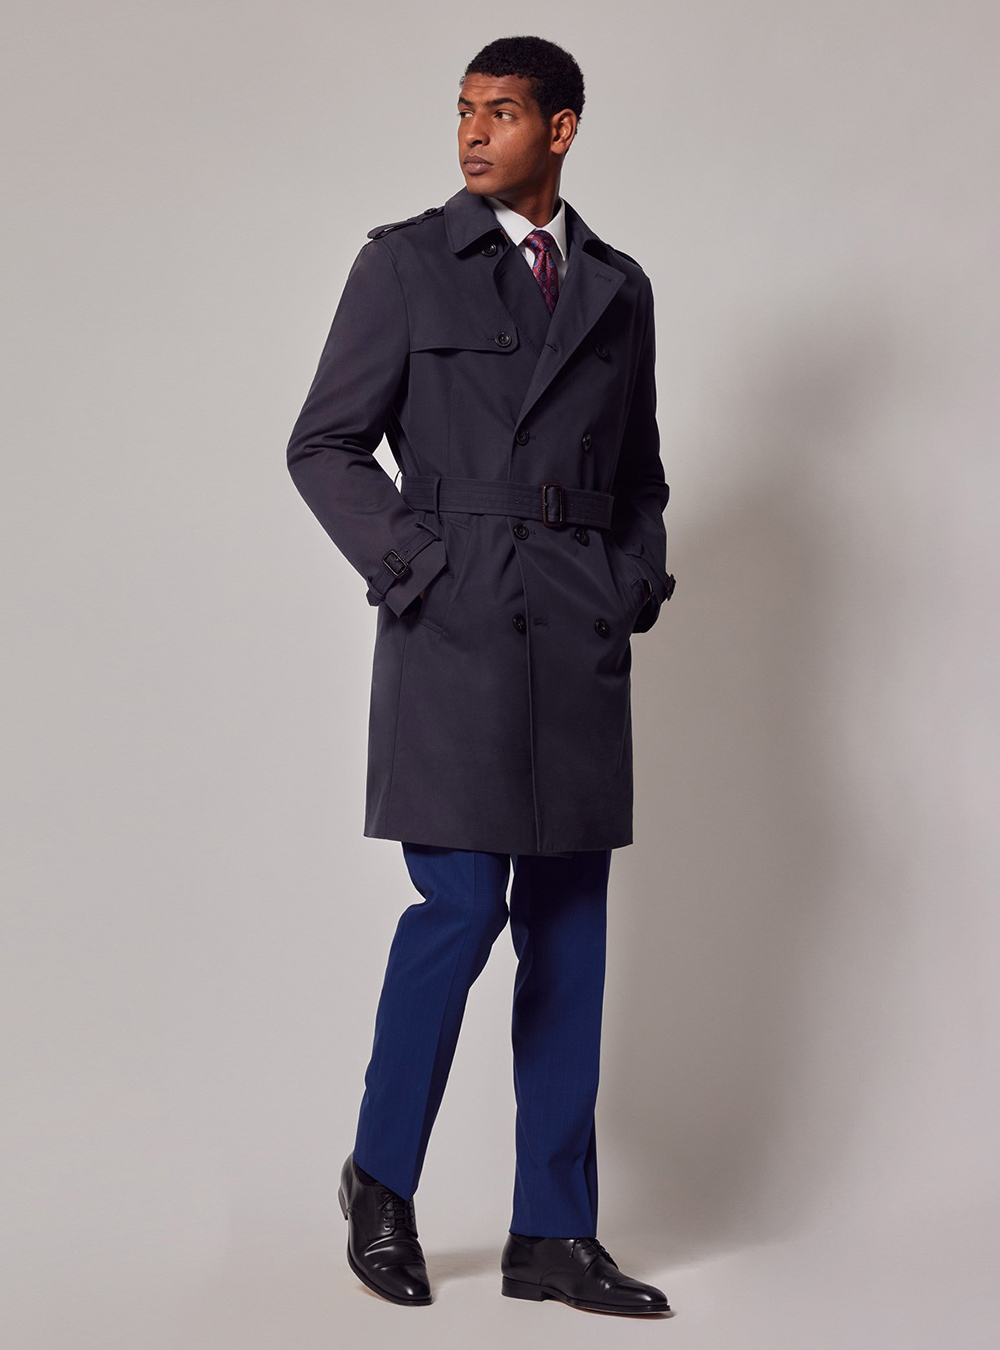 navy trench coat, white shirt, burgundy tie, blue pants, and black derby shoes